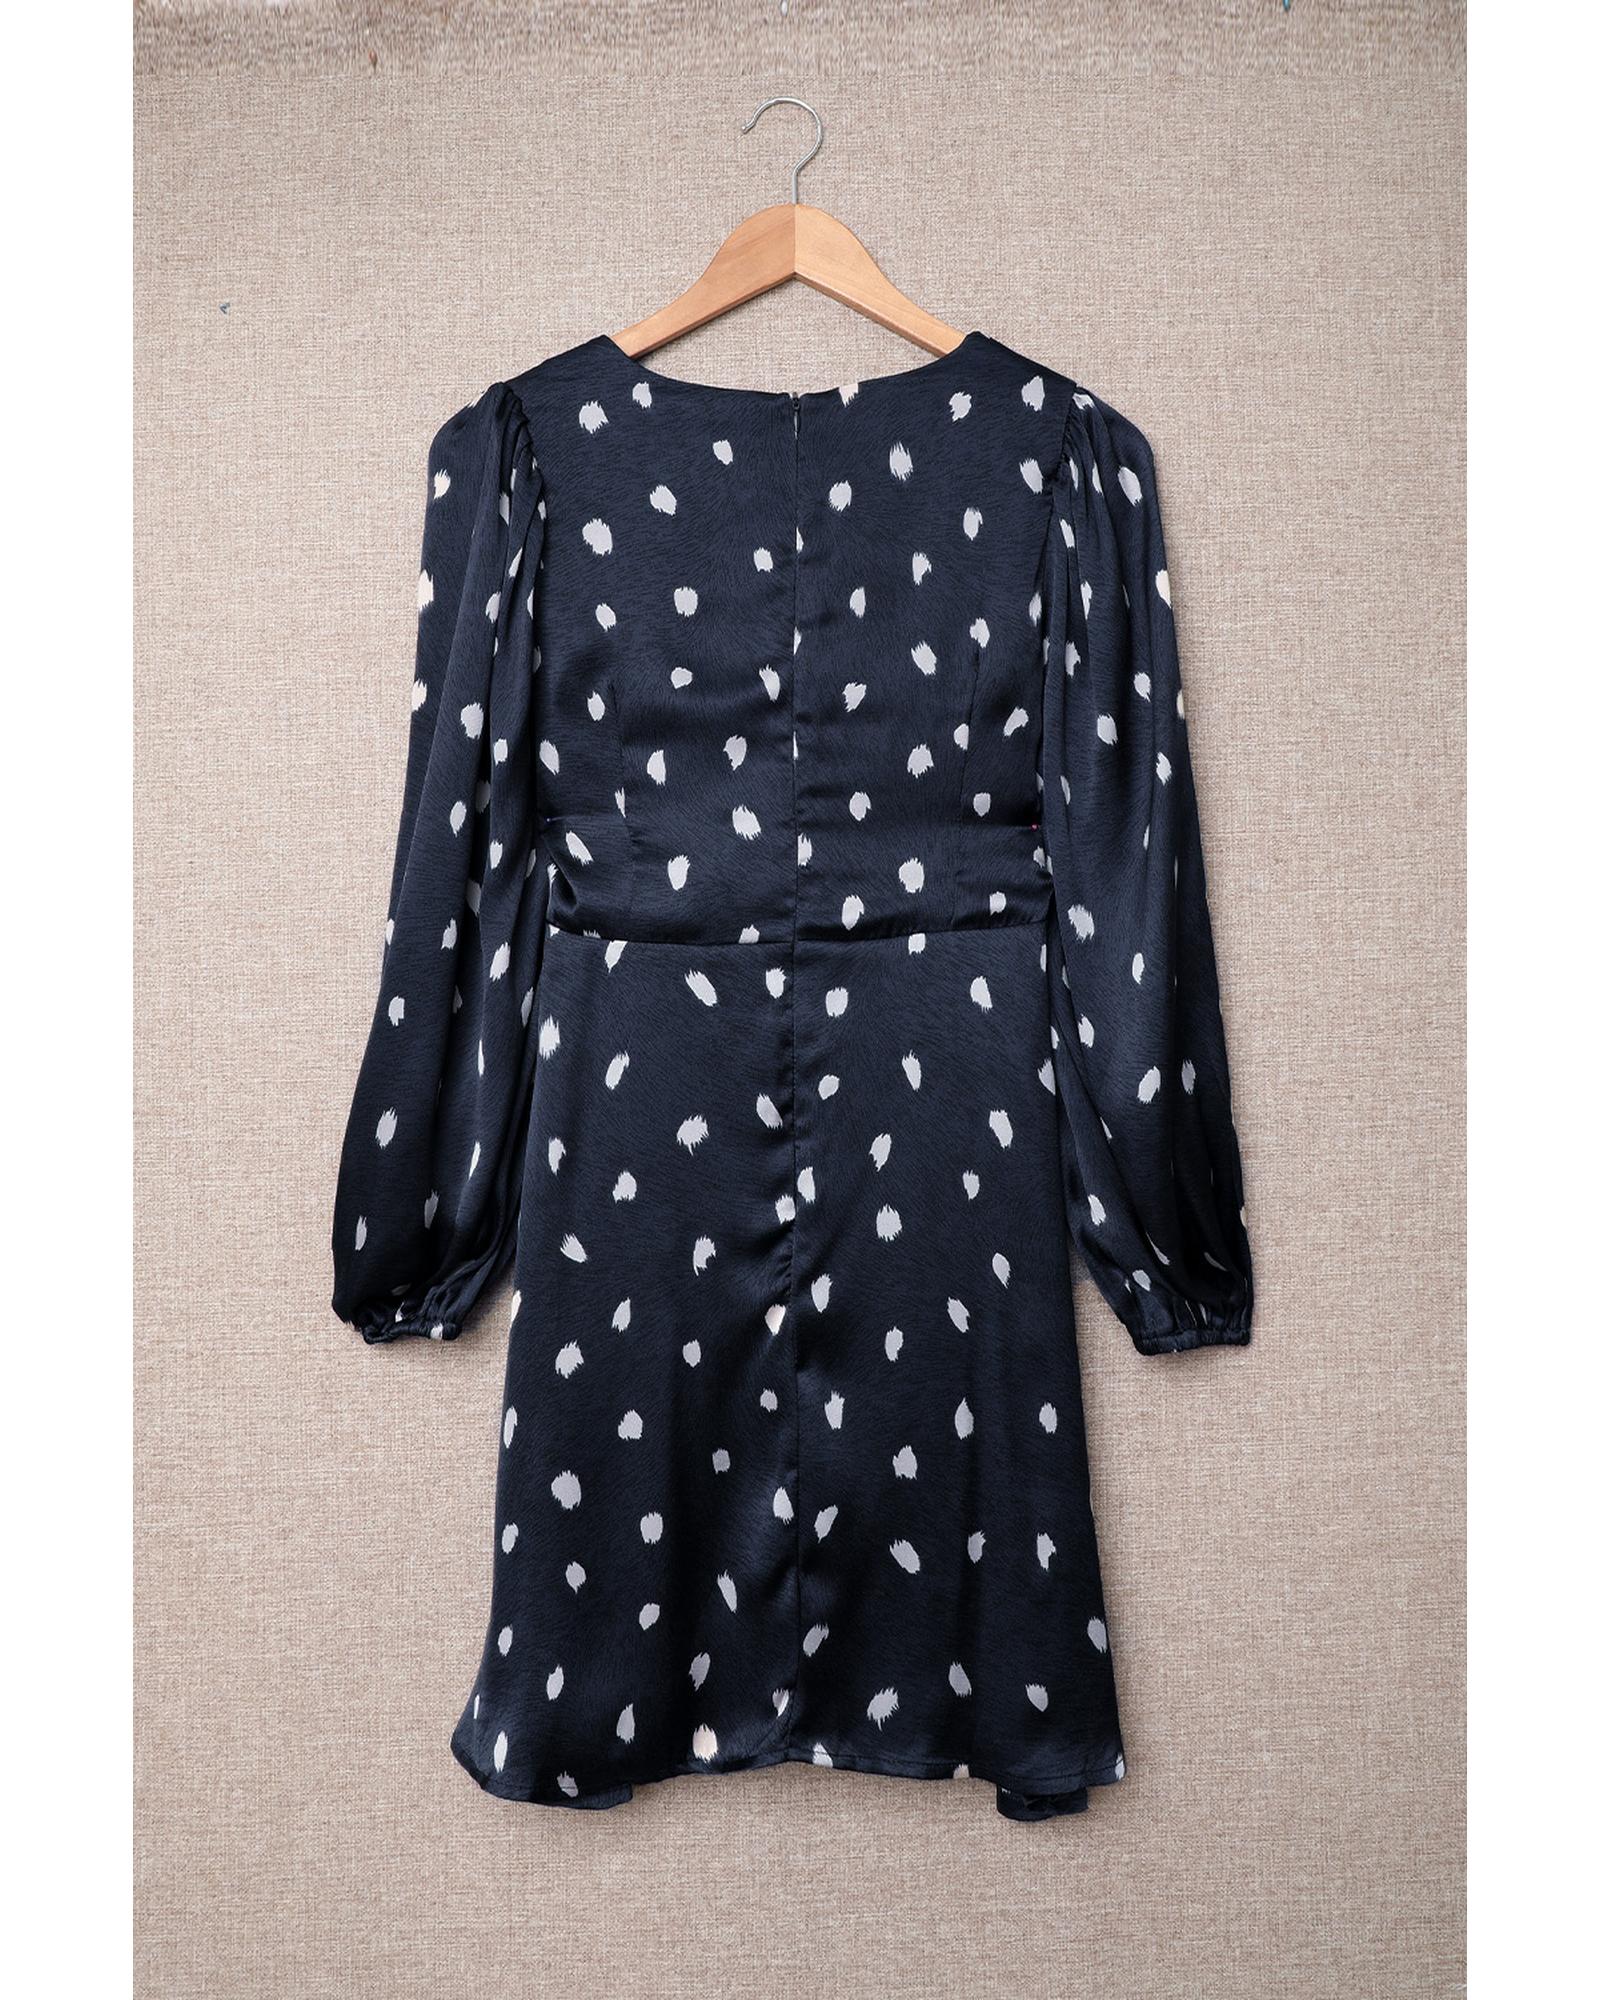 Dot Print A-Line Dress with Deep V Neck and Balloon Sleeves - L